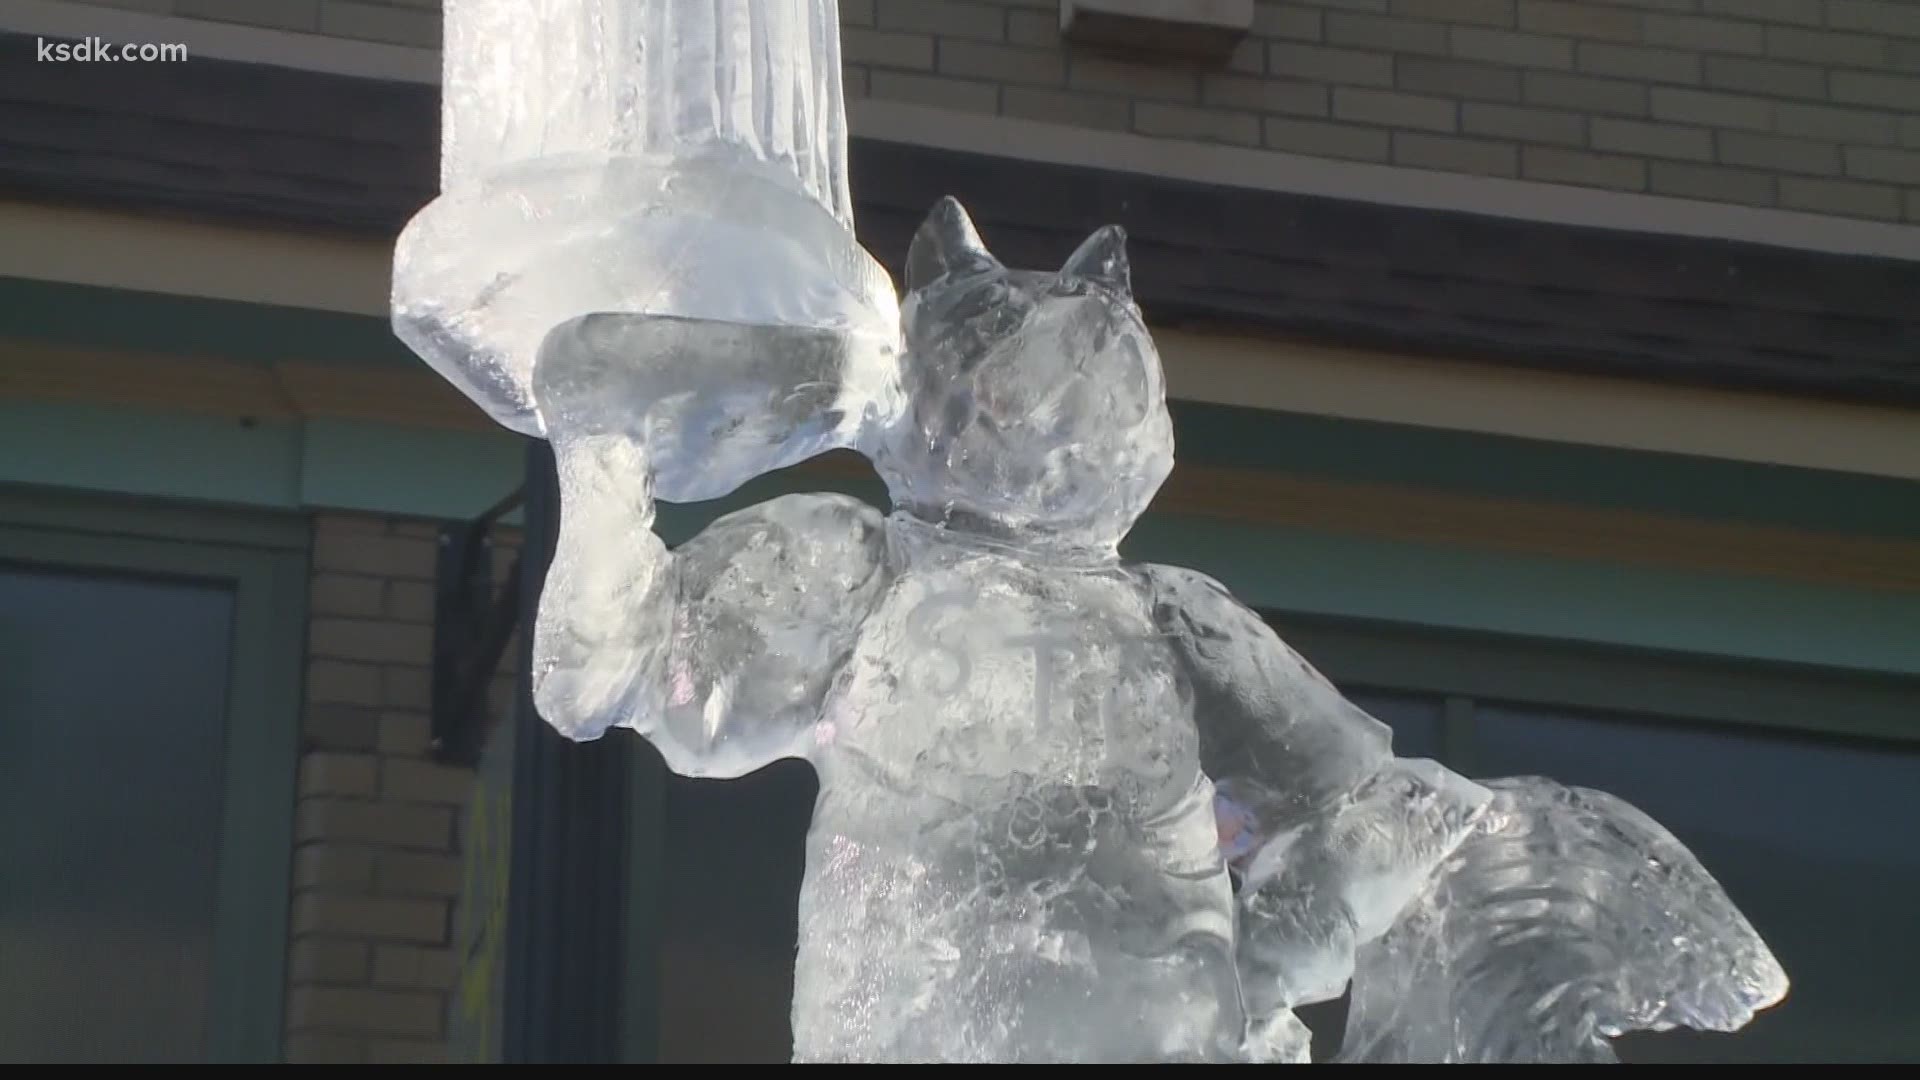 Ice carvers will fill two blocks of North Main Street in St. Charles.